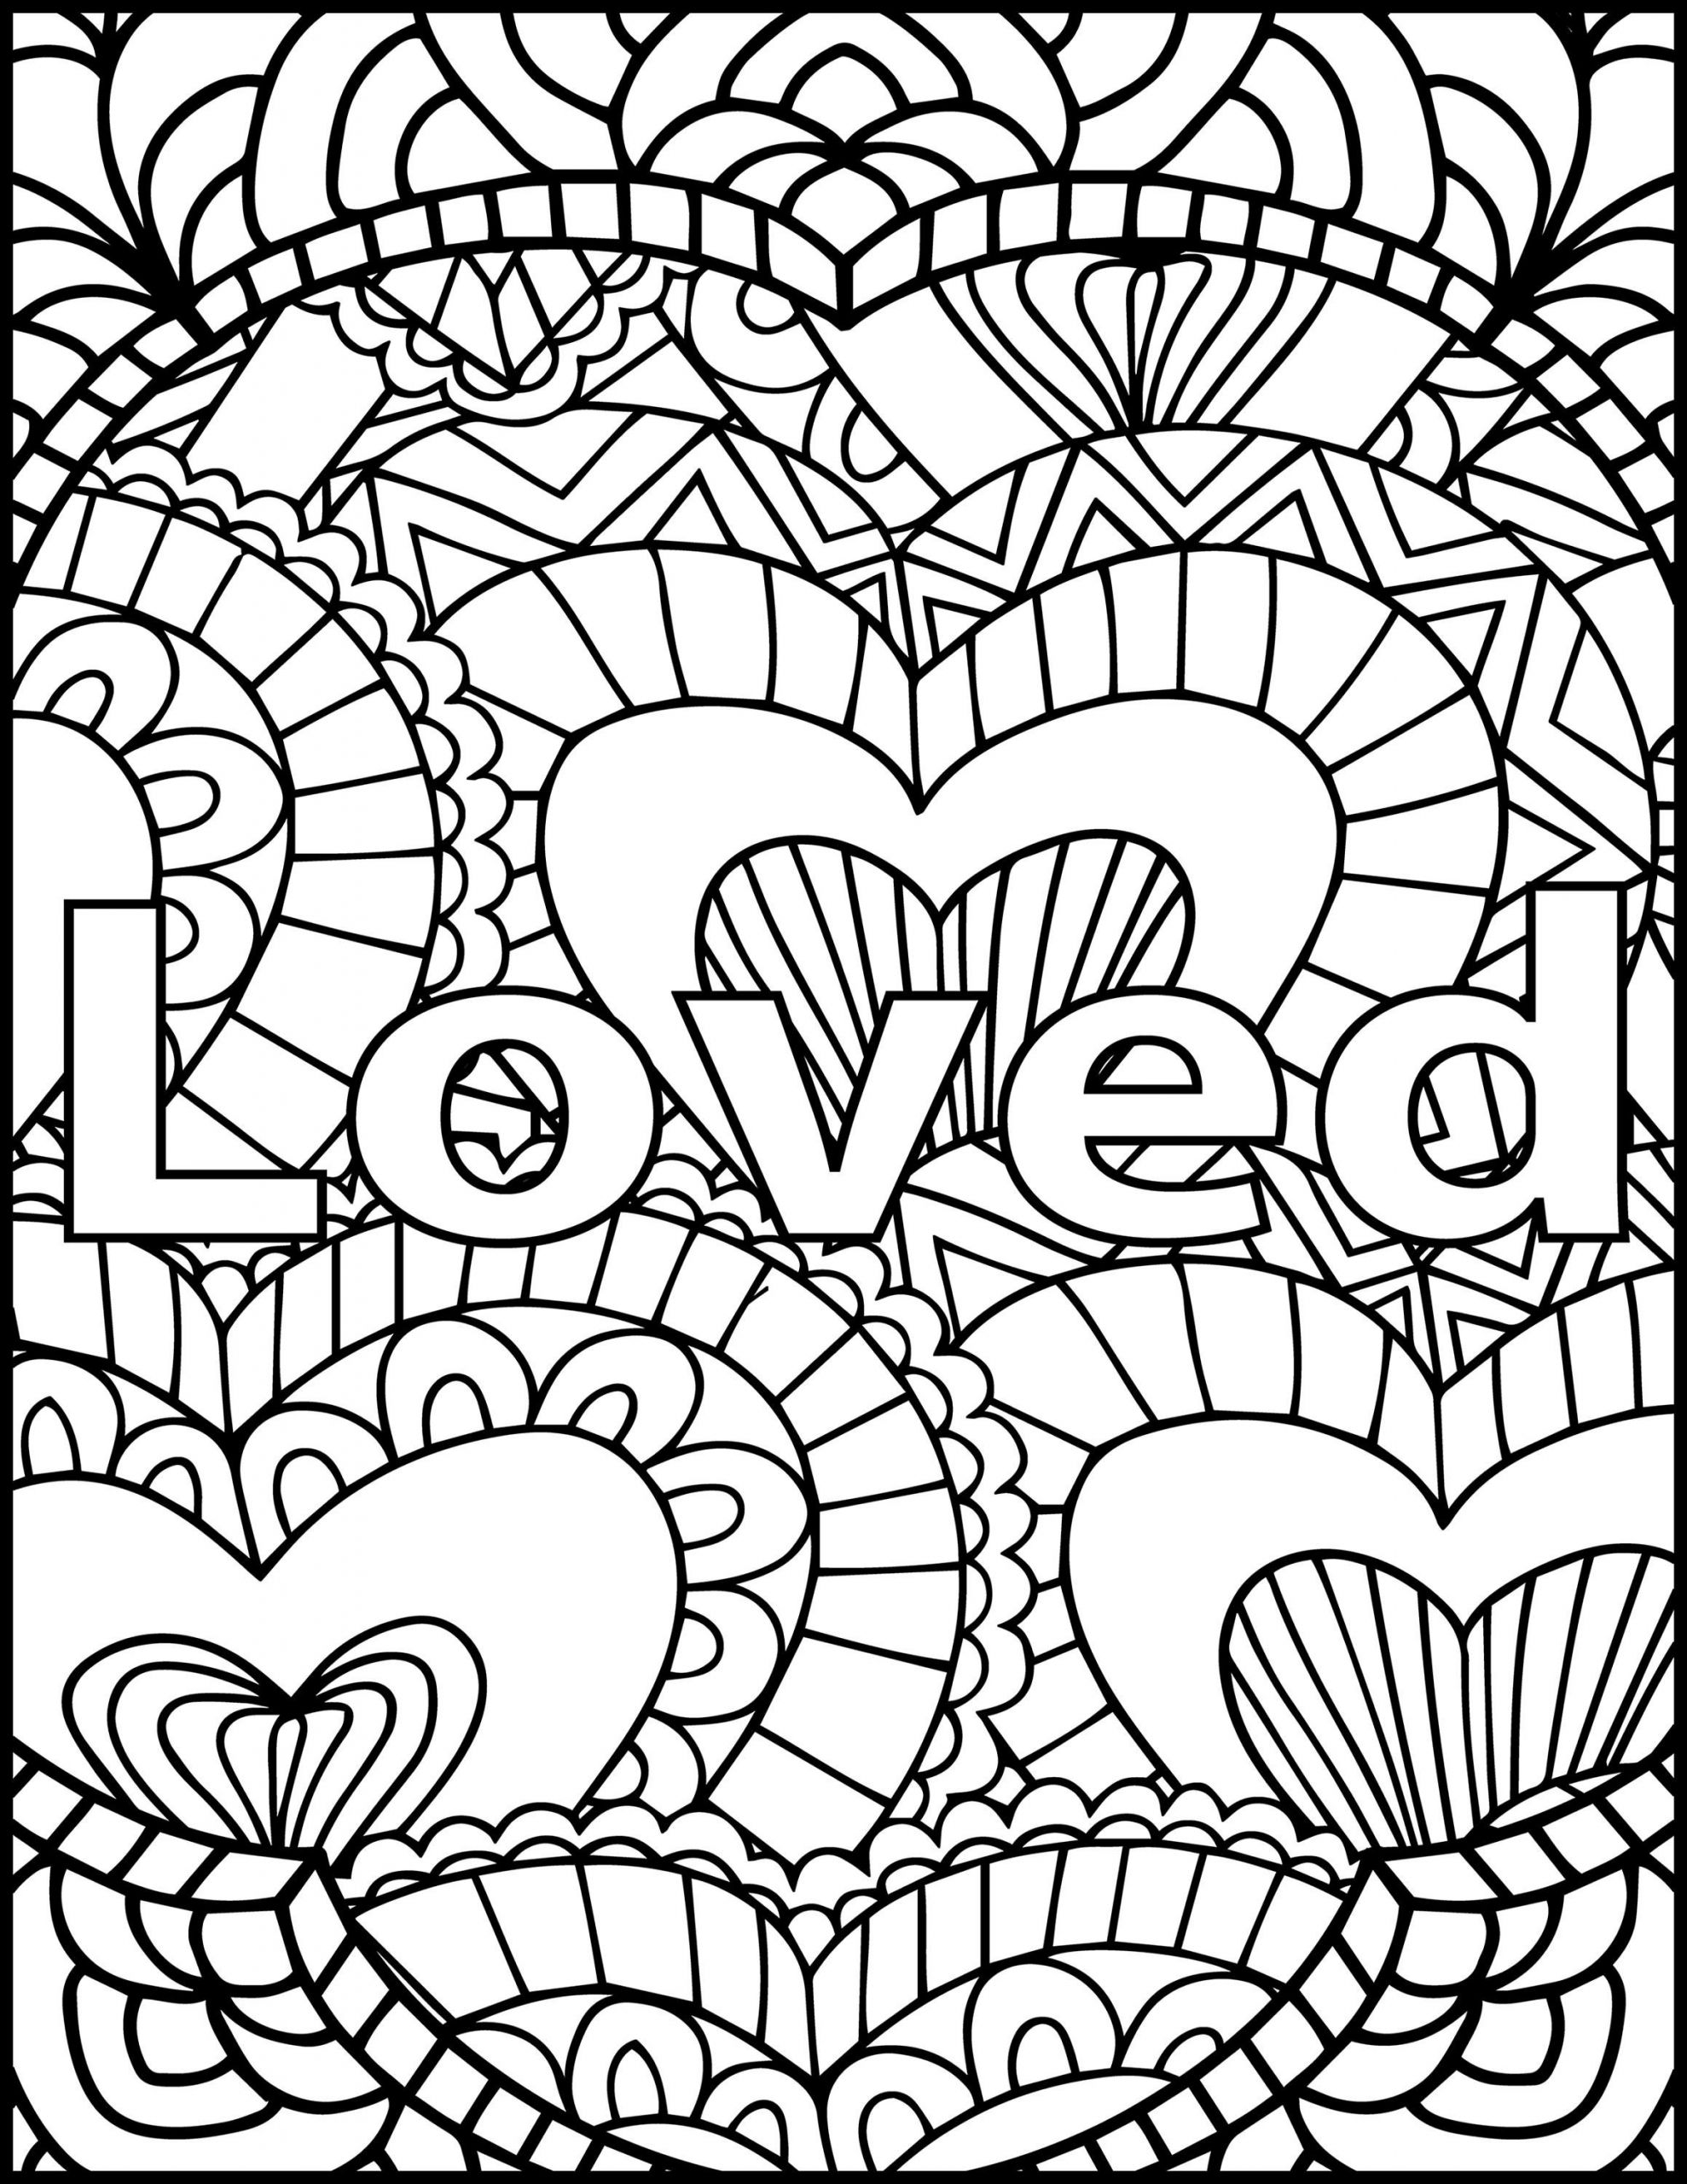 Coloring Pages Adult
 I Am Loved Adult Coloring Page Inspiring Message Coloring